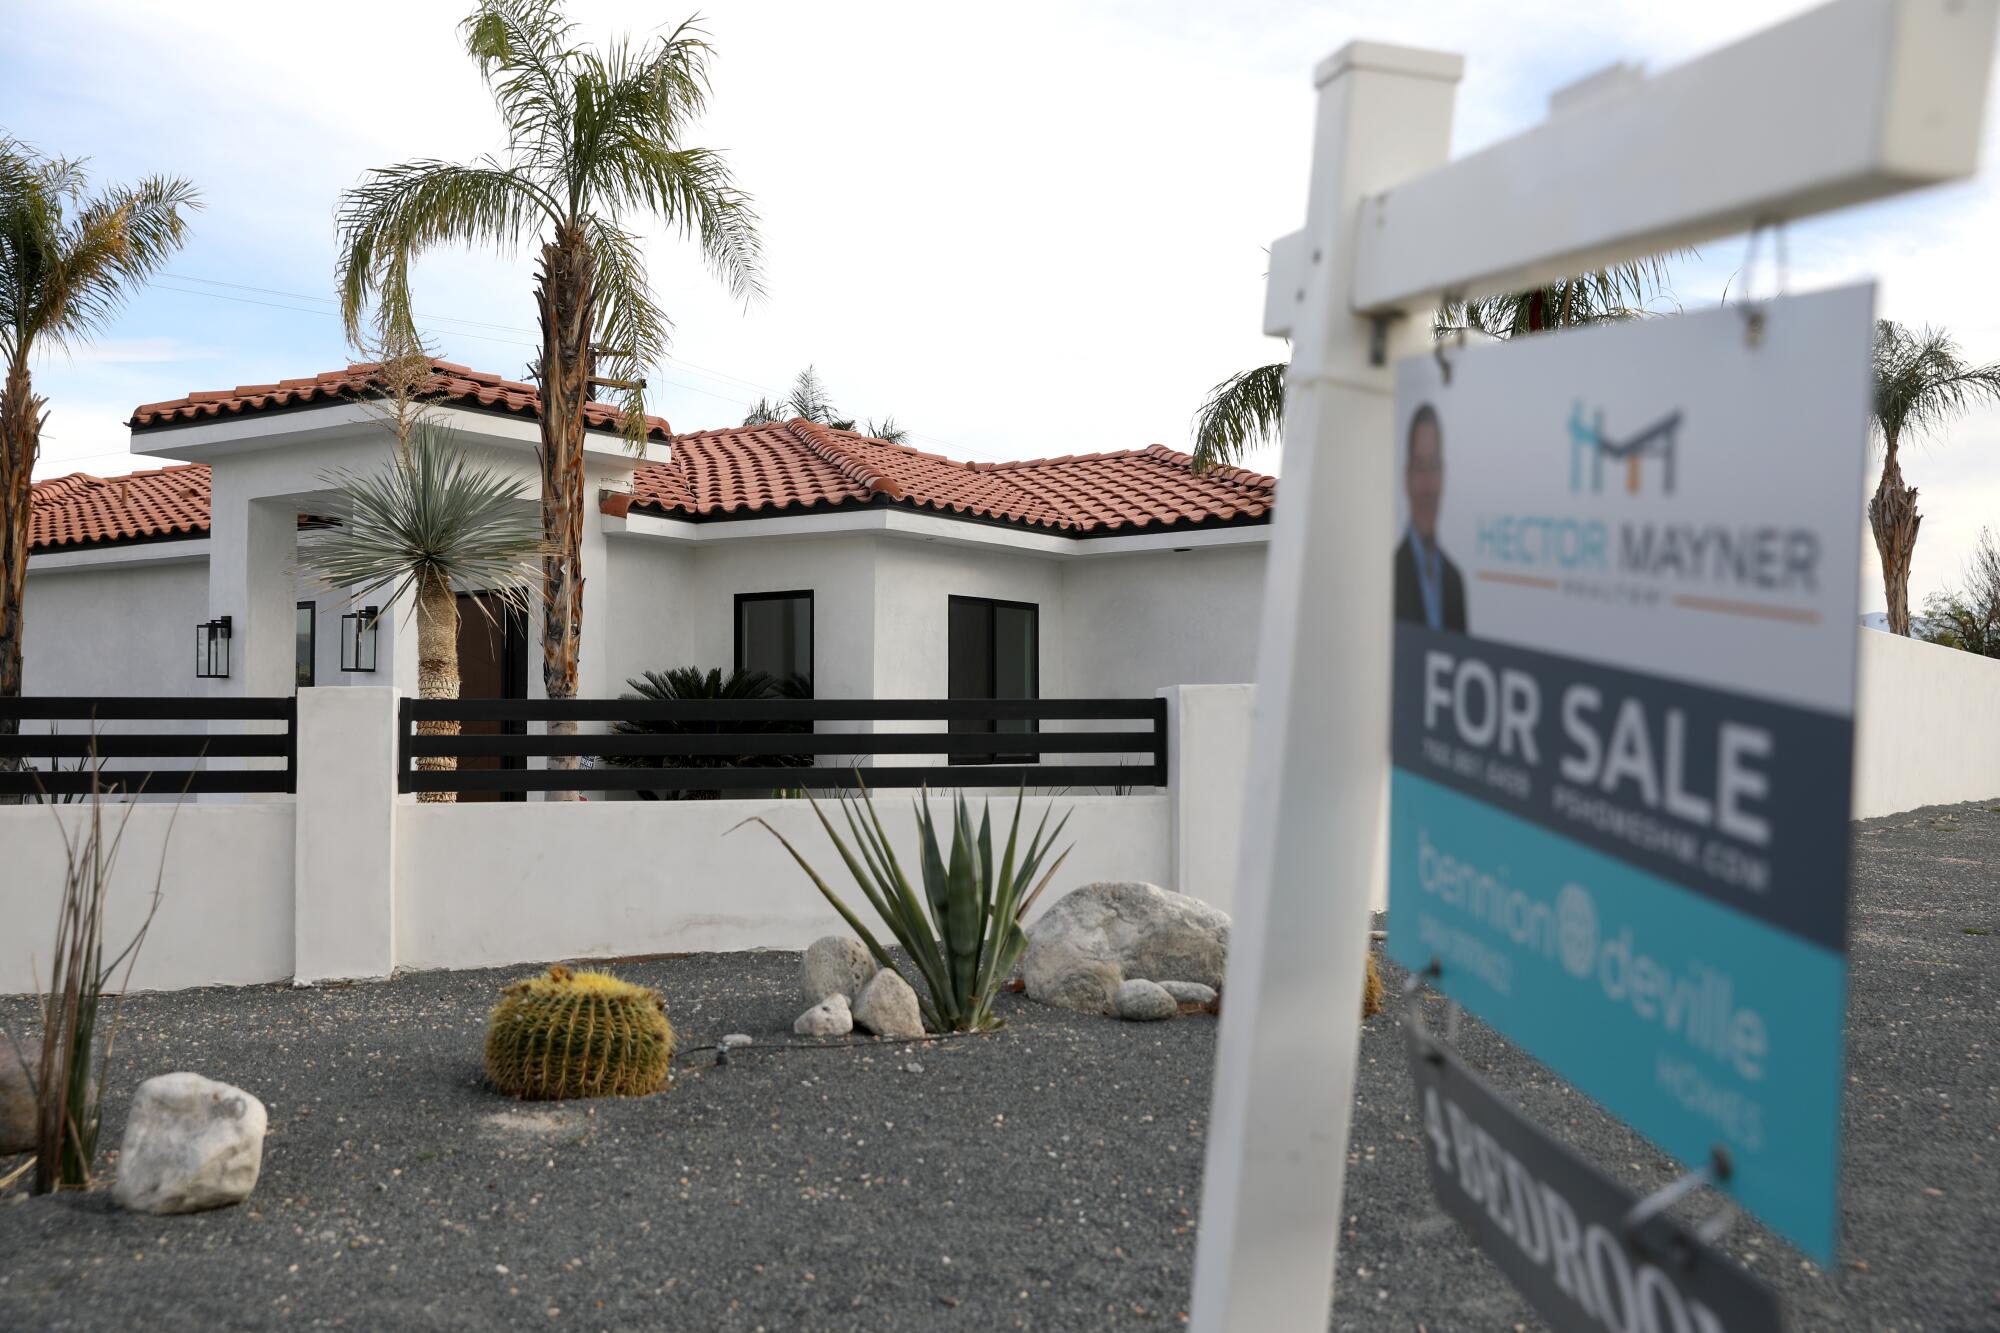 A home for sale along Francis Drive in the Desert Park Estates community in Palm Springs.